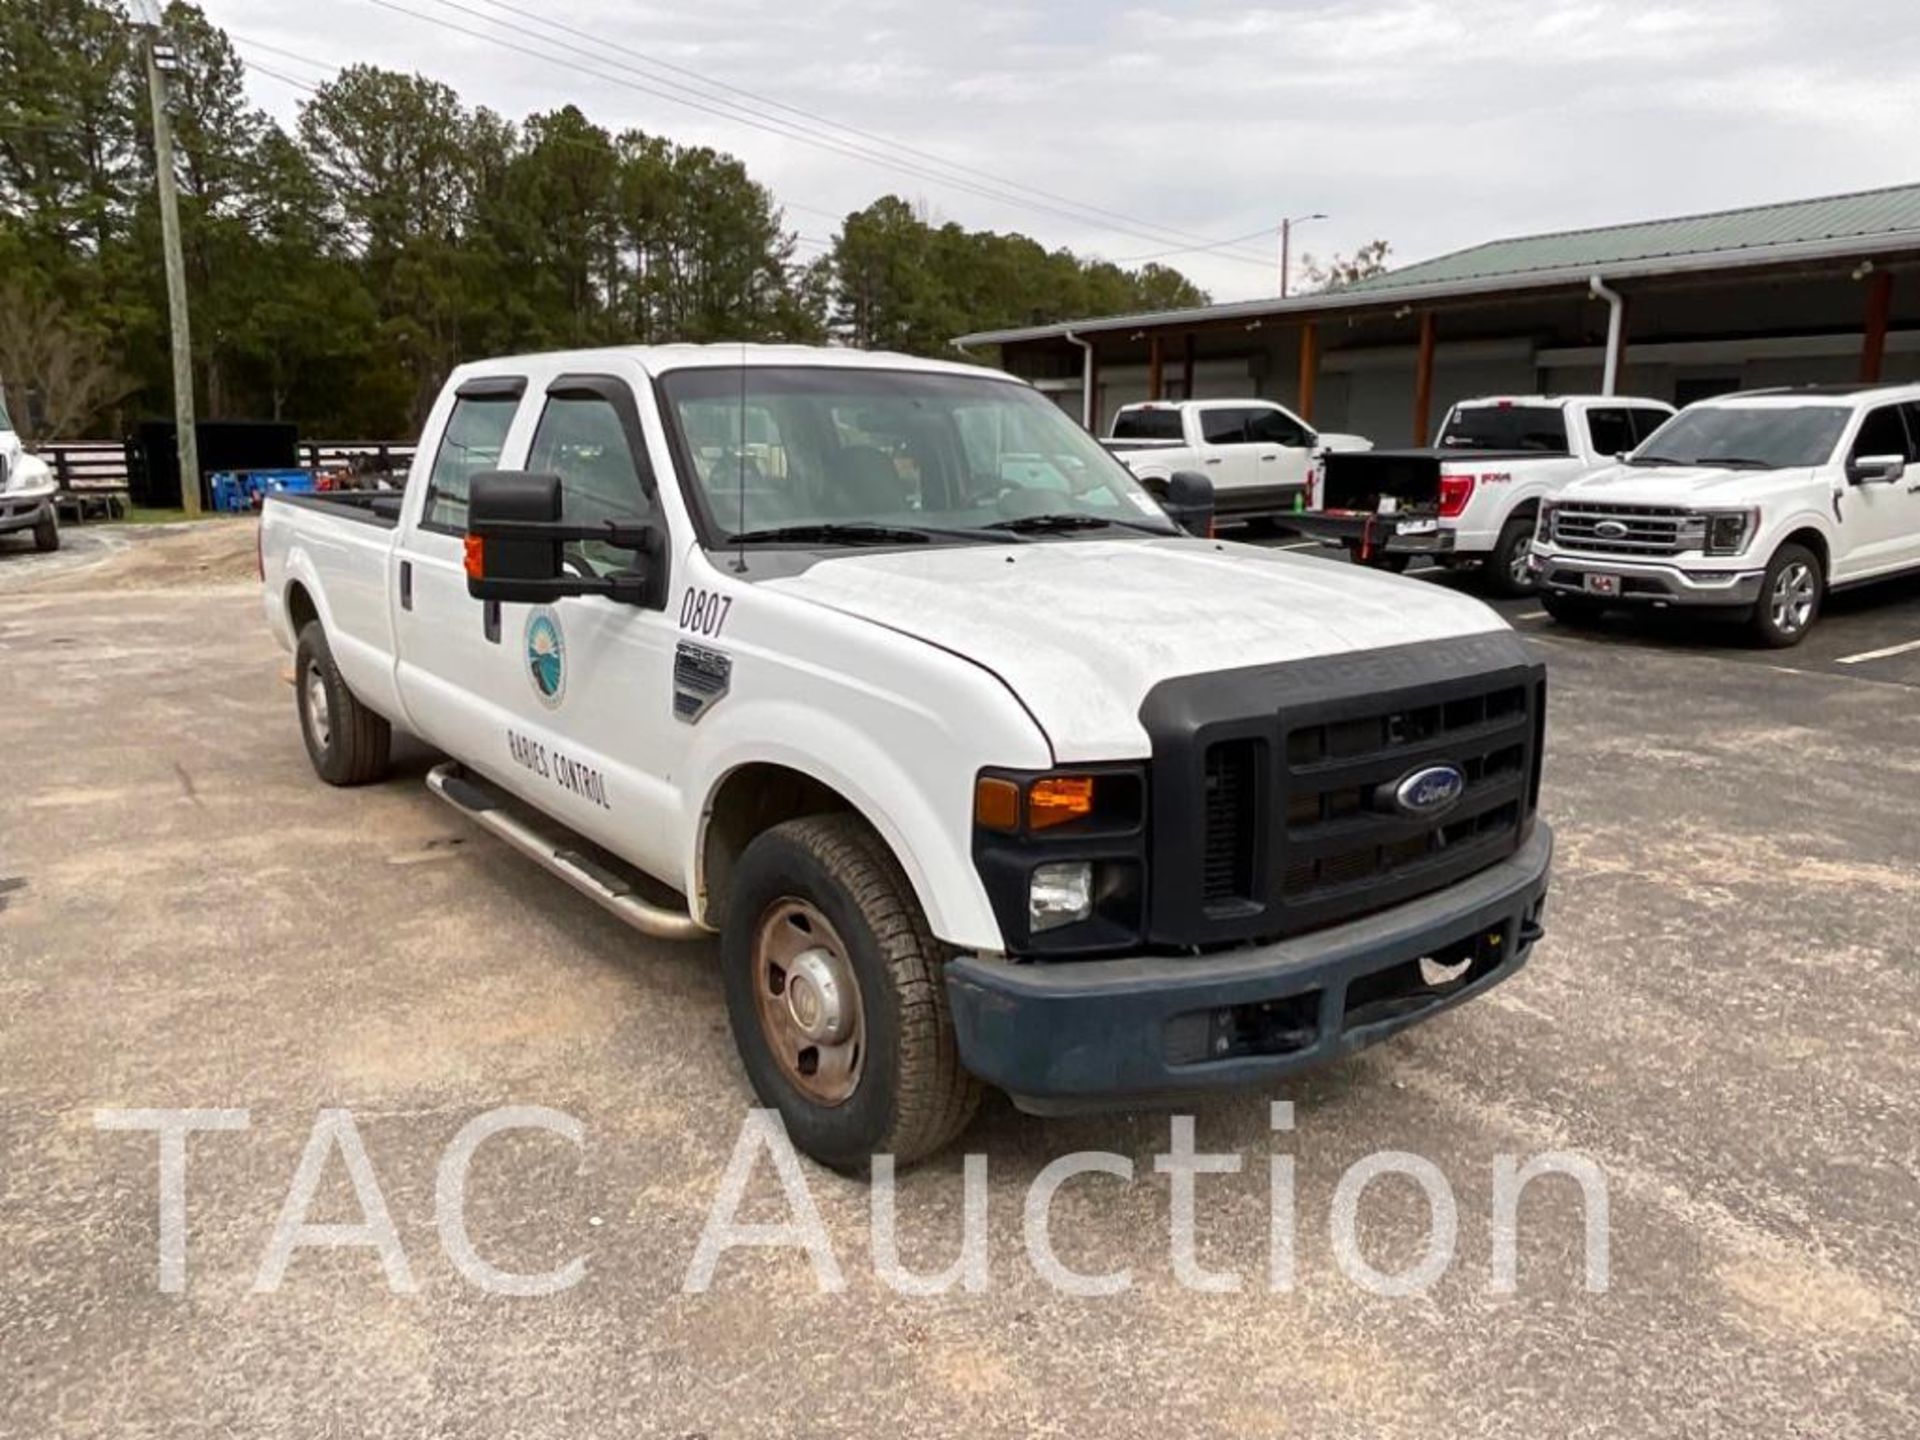 2008 Ford F-350 Super Duty Crew Cab Pickup Truck - Image 7 of 50